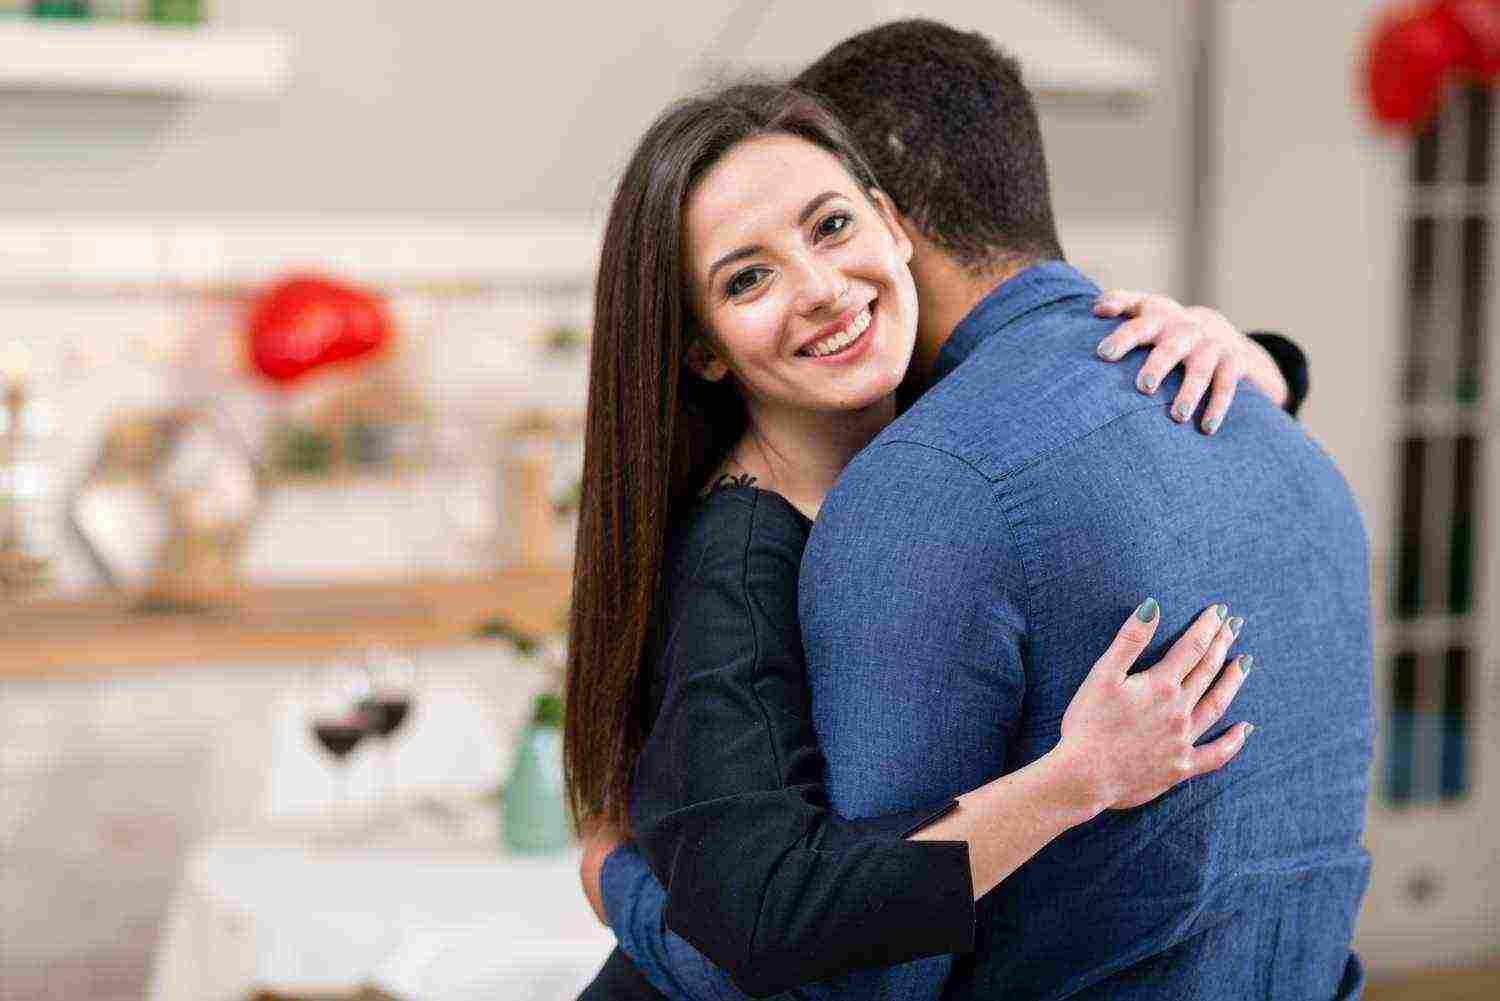 What does it mean when a guy hugs you for more than 5 seconds?